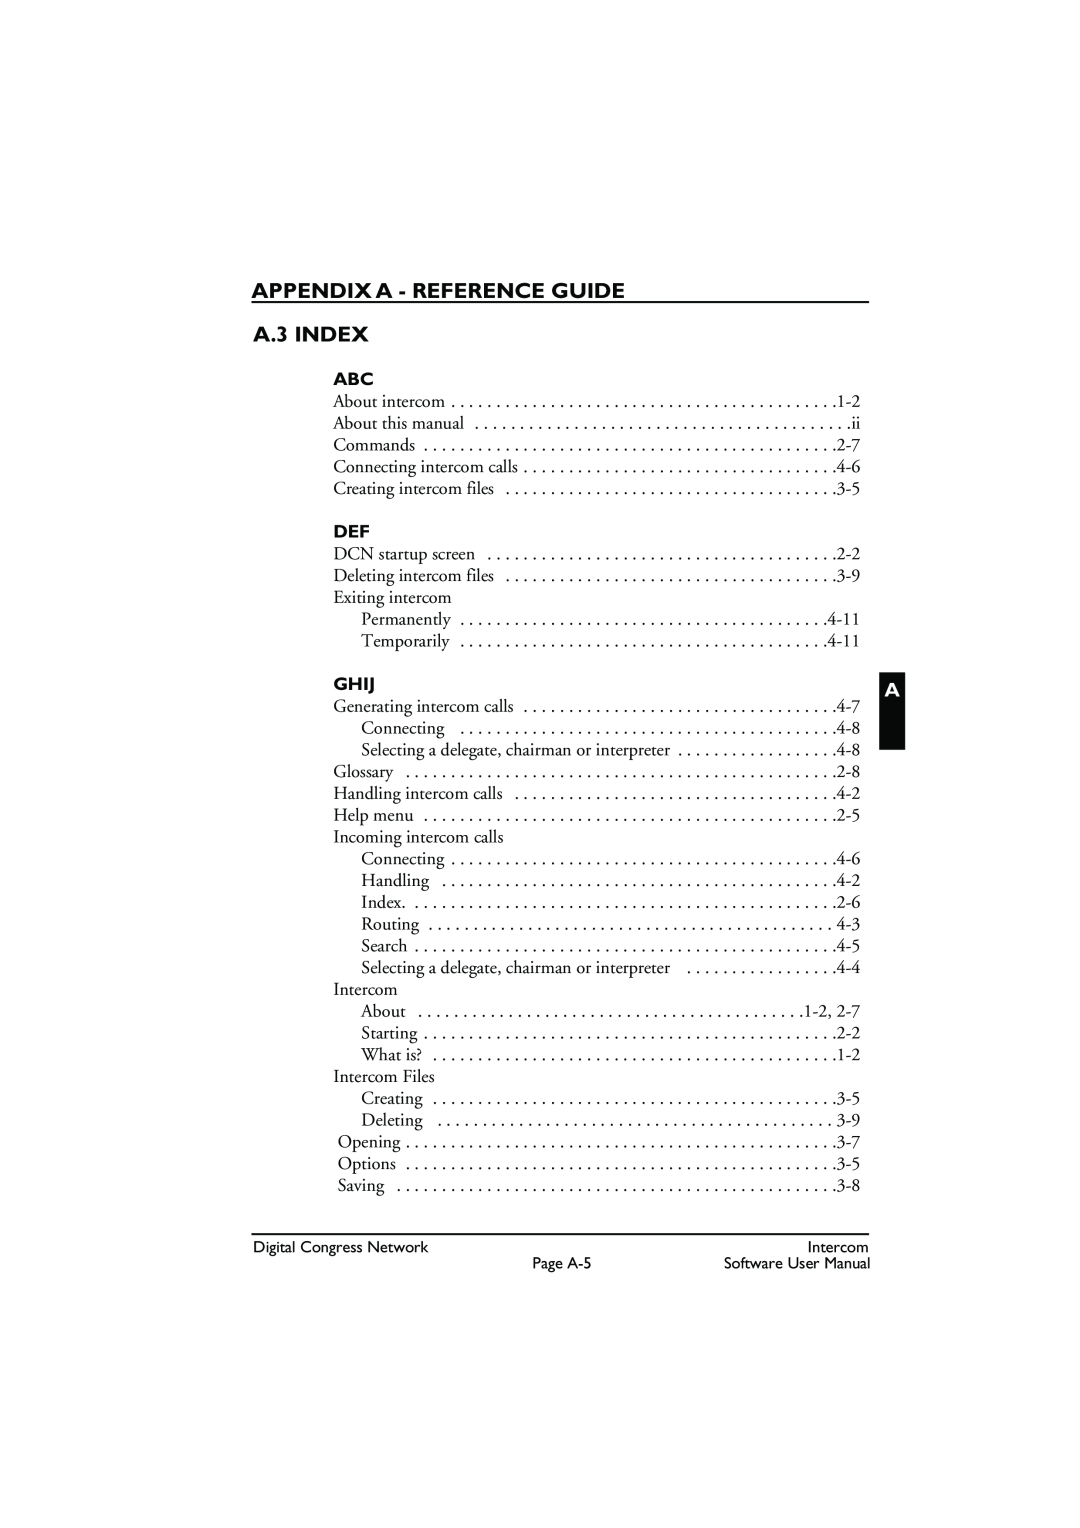 Bosch Appliances LBB 3573 user manual APPENDIX A - REFERENCE GUIDE A.3 INDEX, Ghij 